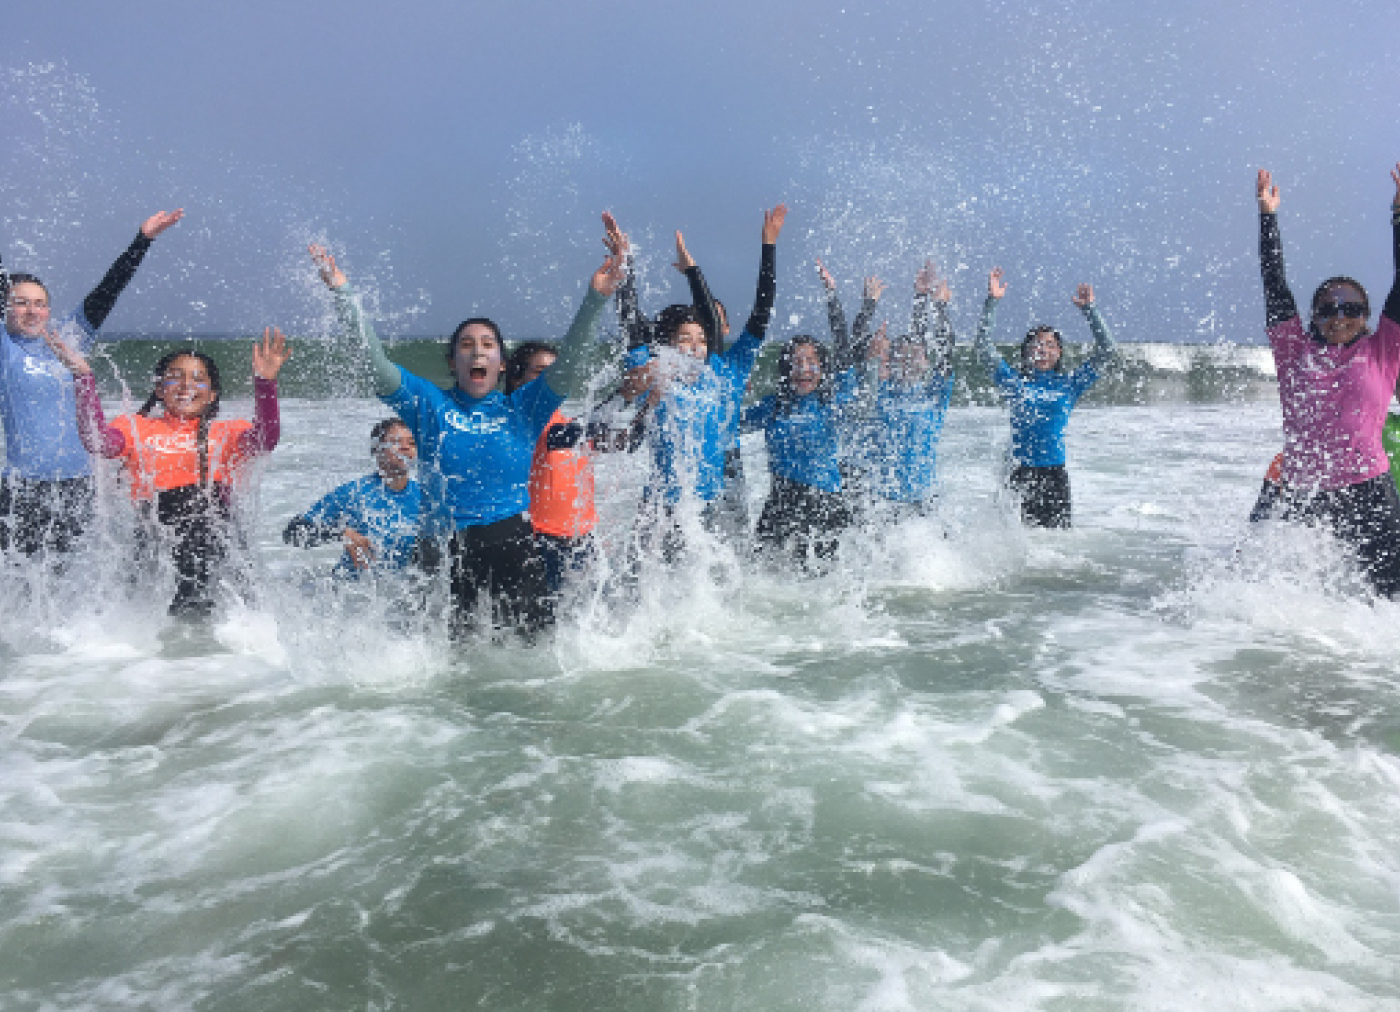 A group of teenagers in wetsuits jumping and raising their hands in the air in waist deep water